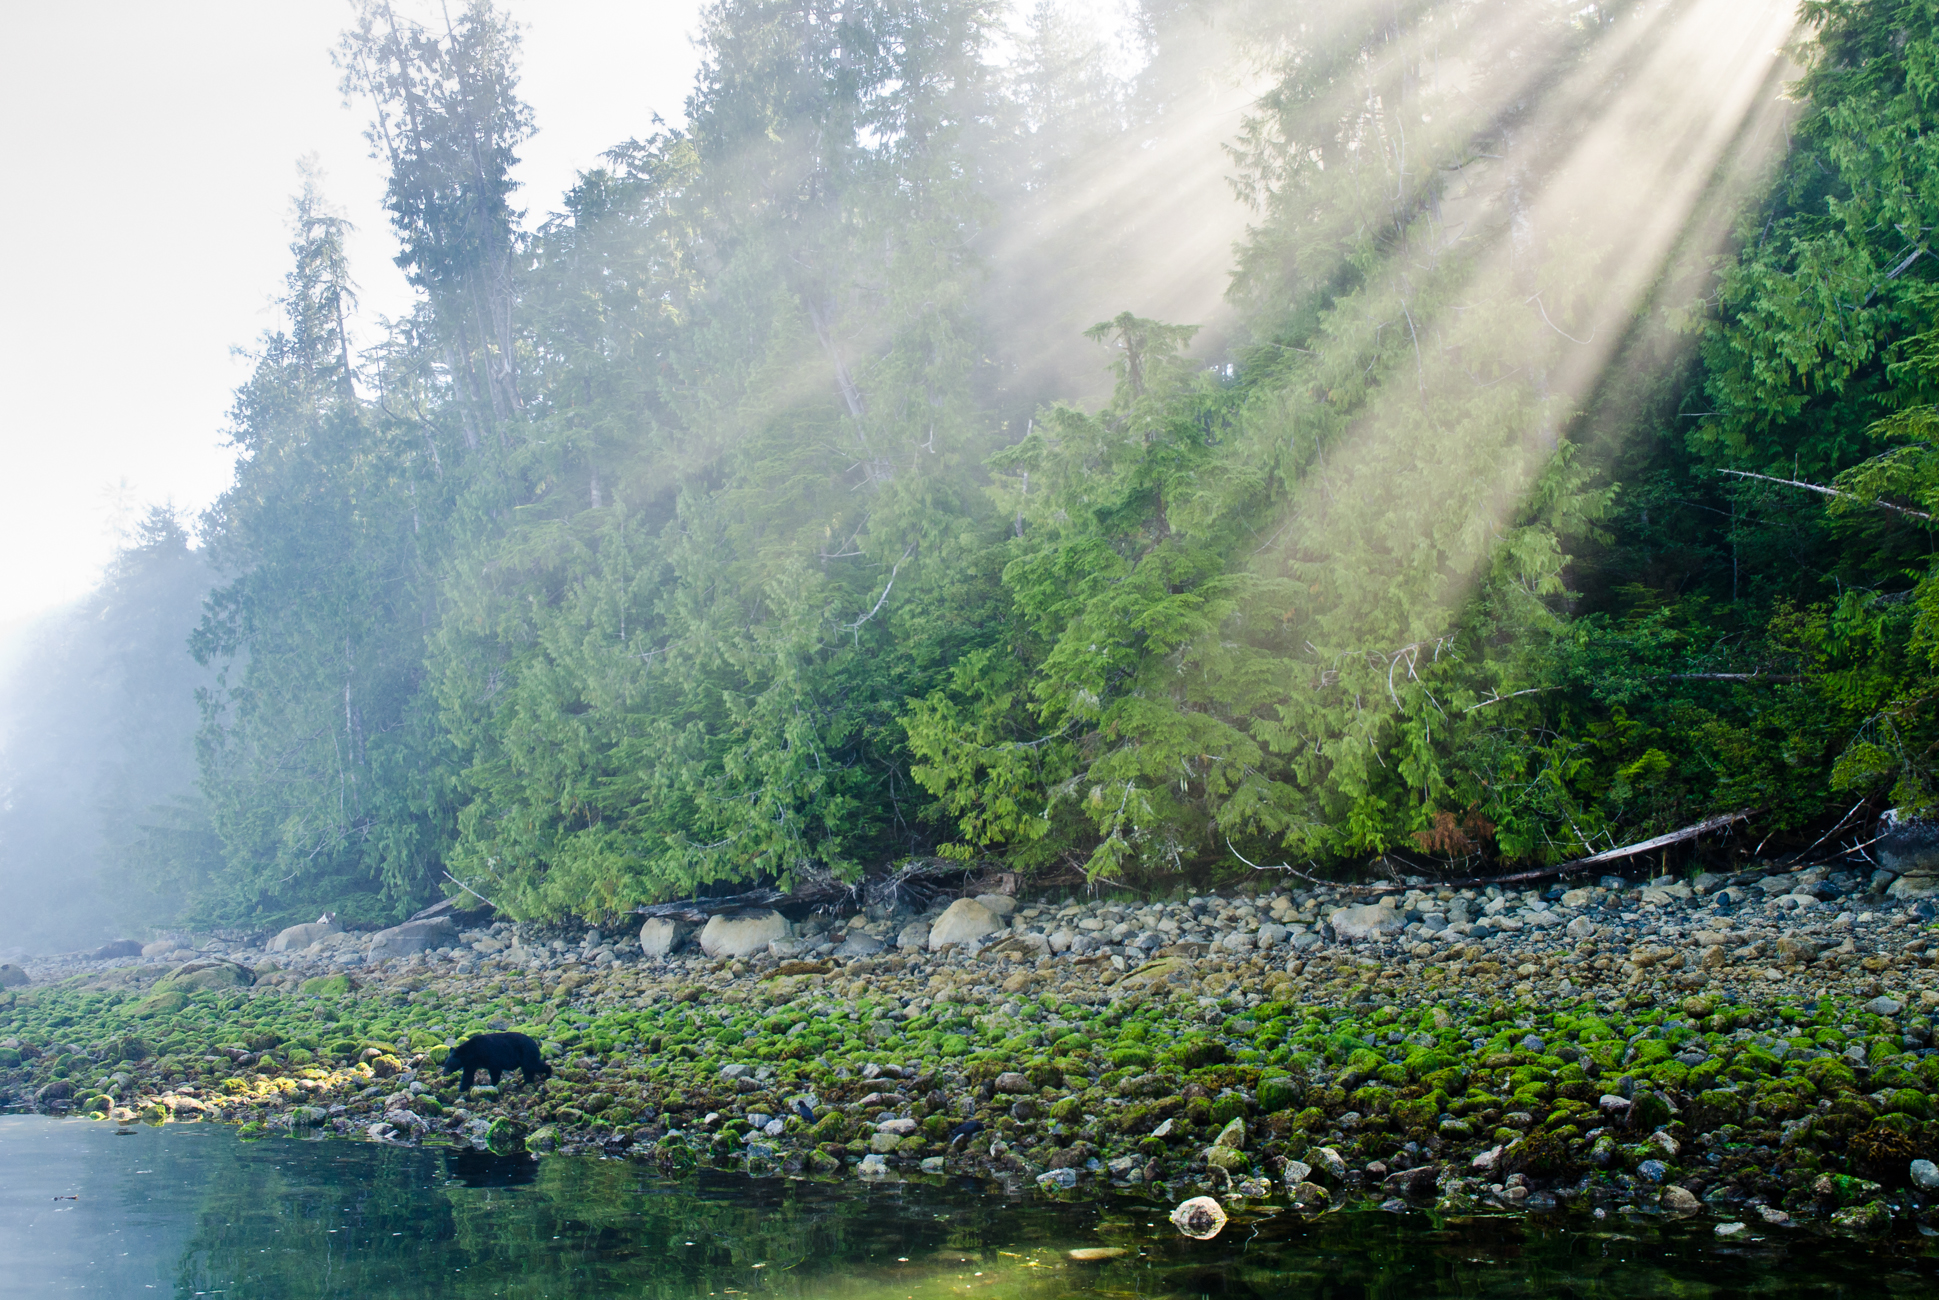  A black bear searches for crabs on the rocky shore whilst the sun burst through a fog filled forest.&nbsp; 